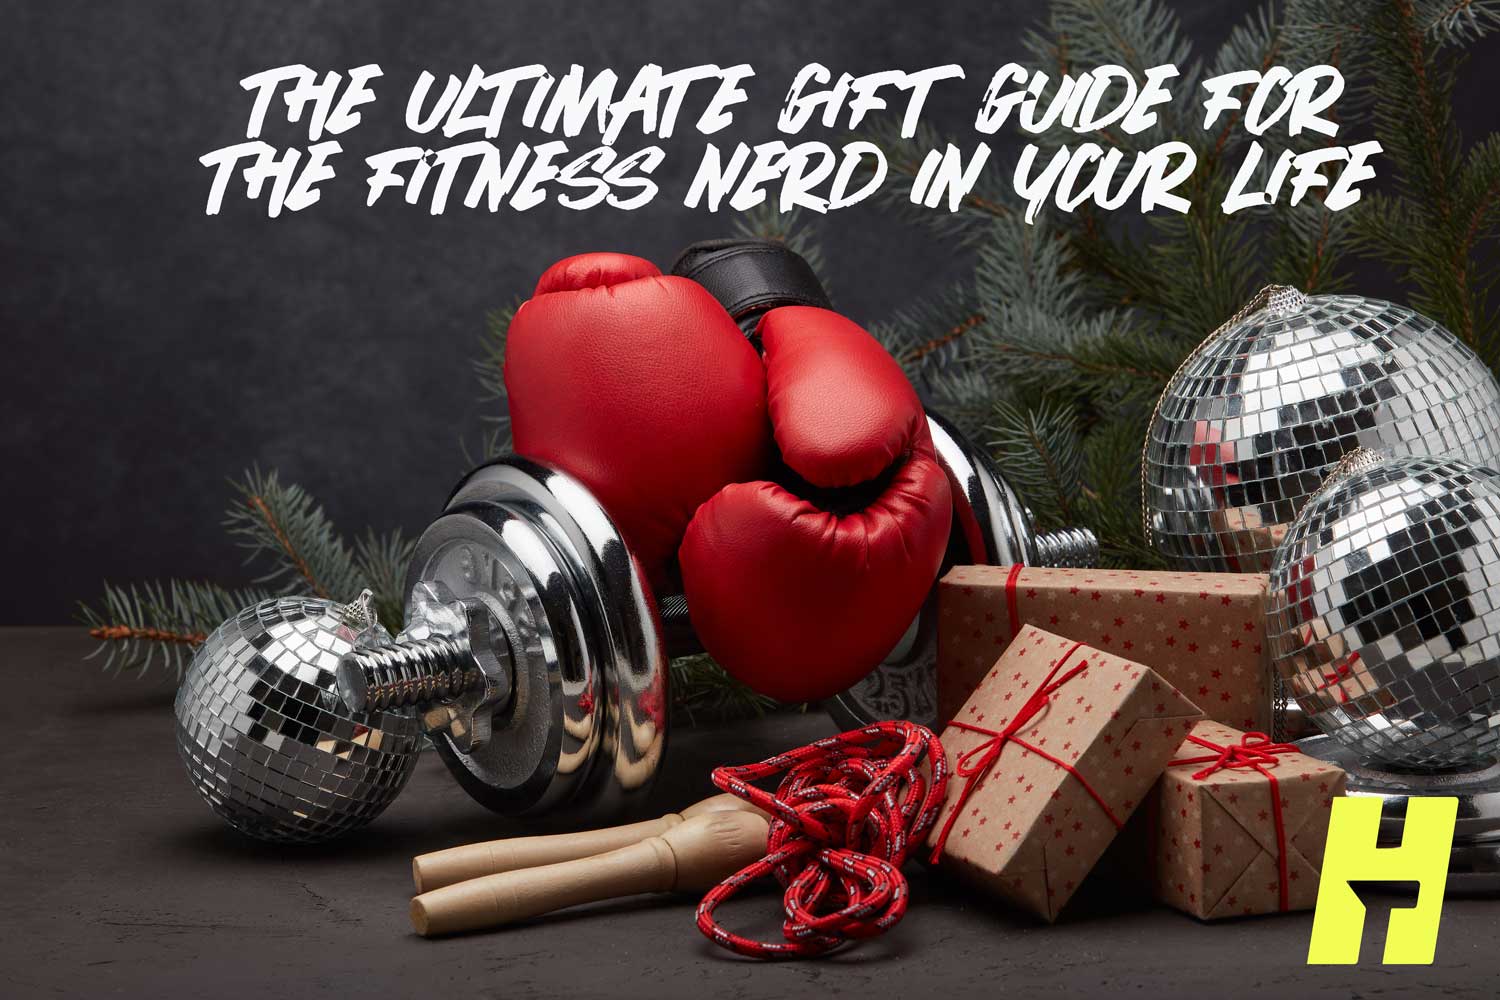 Geek Out With These Fitness Gadget Gifts  Fitness gadgets, Fitness gifts,  Gadget gifts